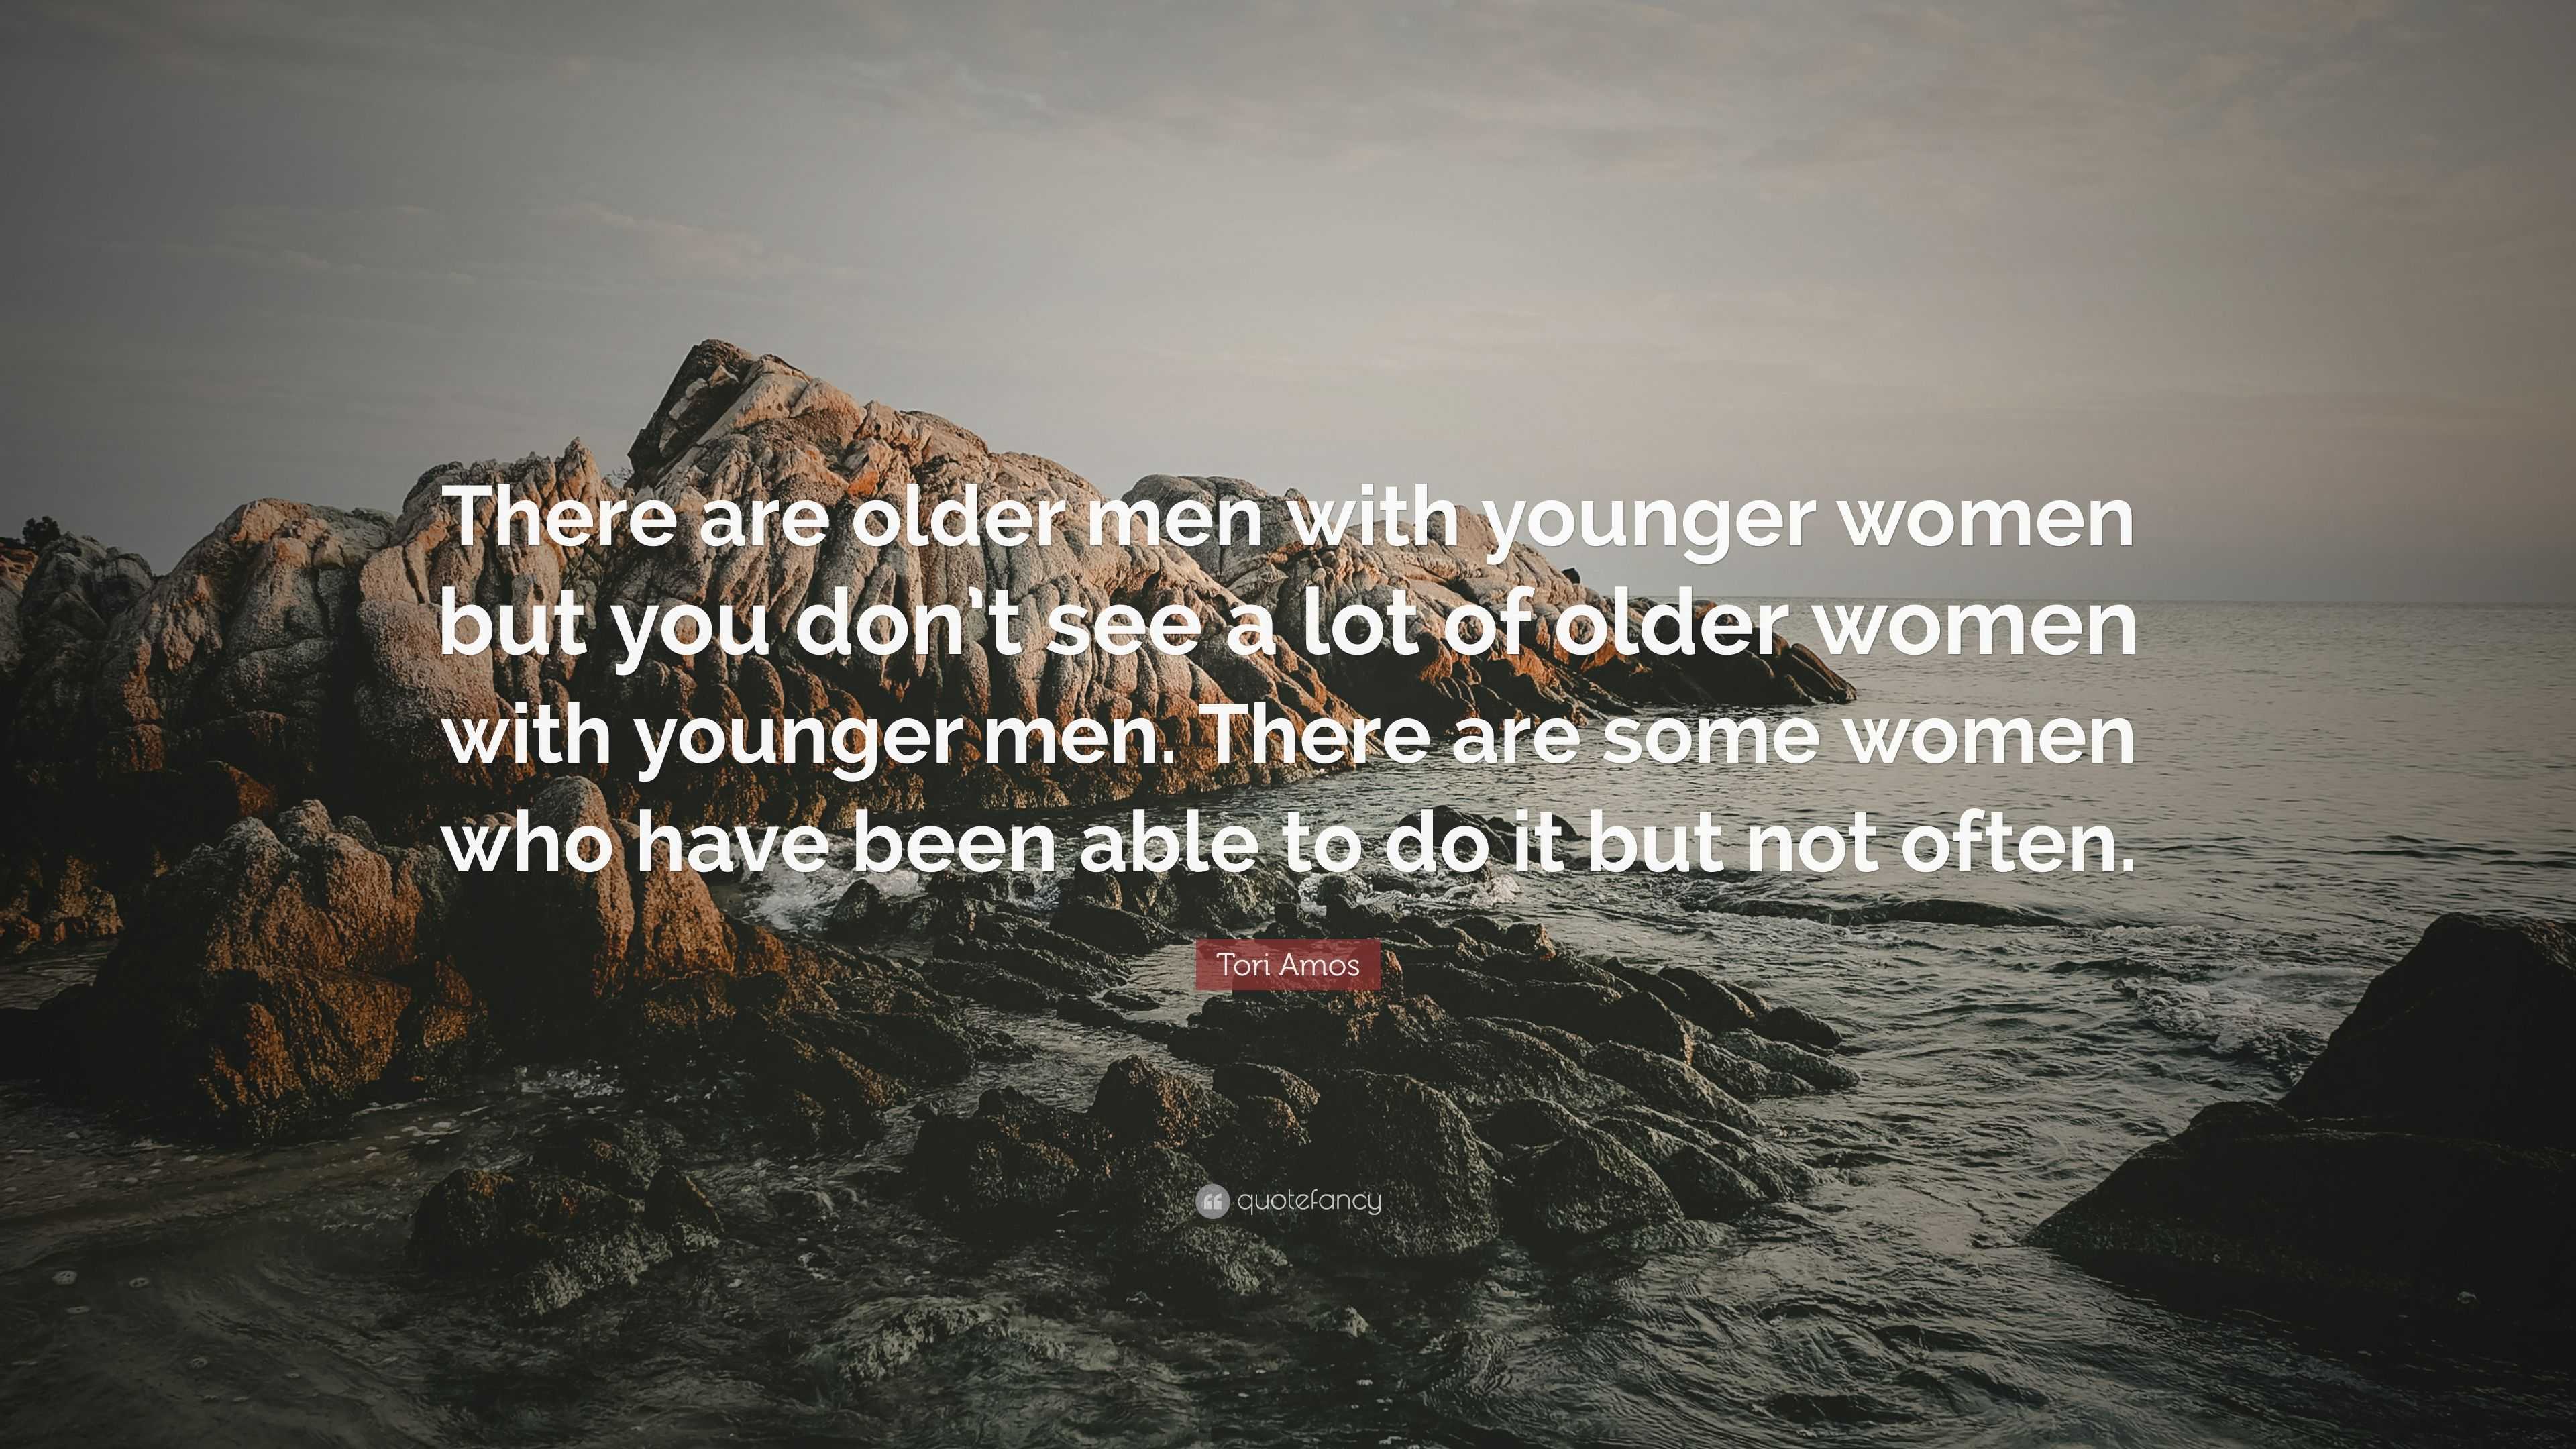 https://quotefancy.com/media/wallpaper/3840x2160/5346588-Tori-Amos-Quote-There-are-older-men-with-younger-women-but-you-don.jpg